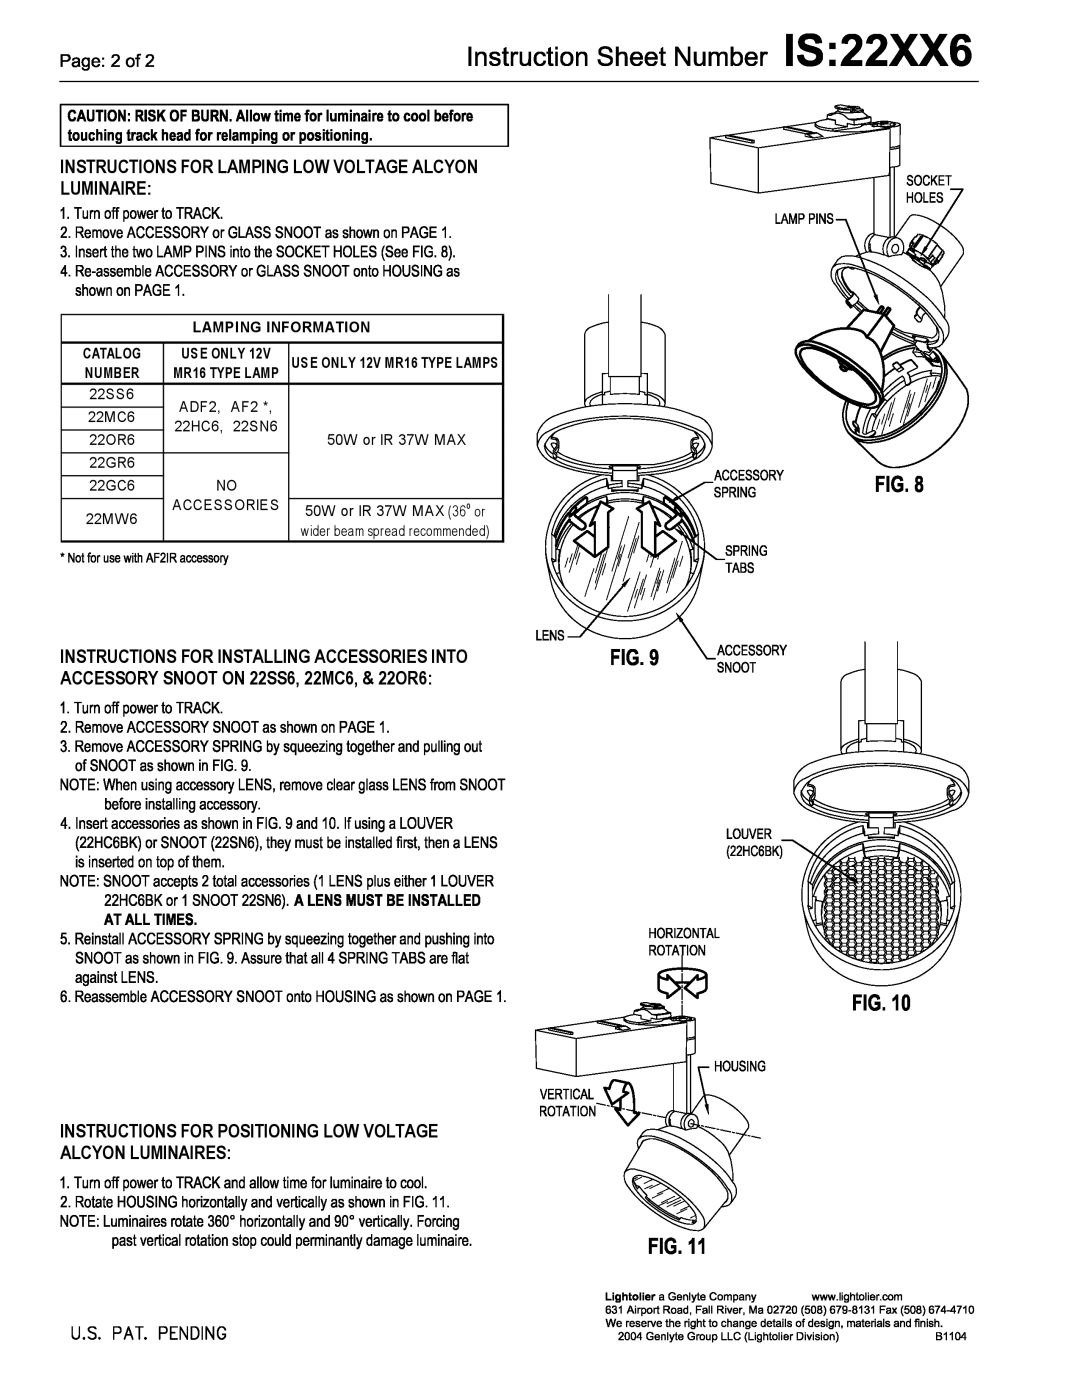 Lightolier 22XX6 manual Lamping Information, Catalog, Use Only, USE ONLY 12V MR16 TYPE LAMPS, Number 